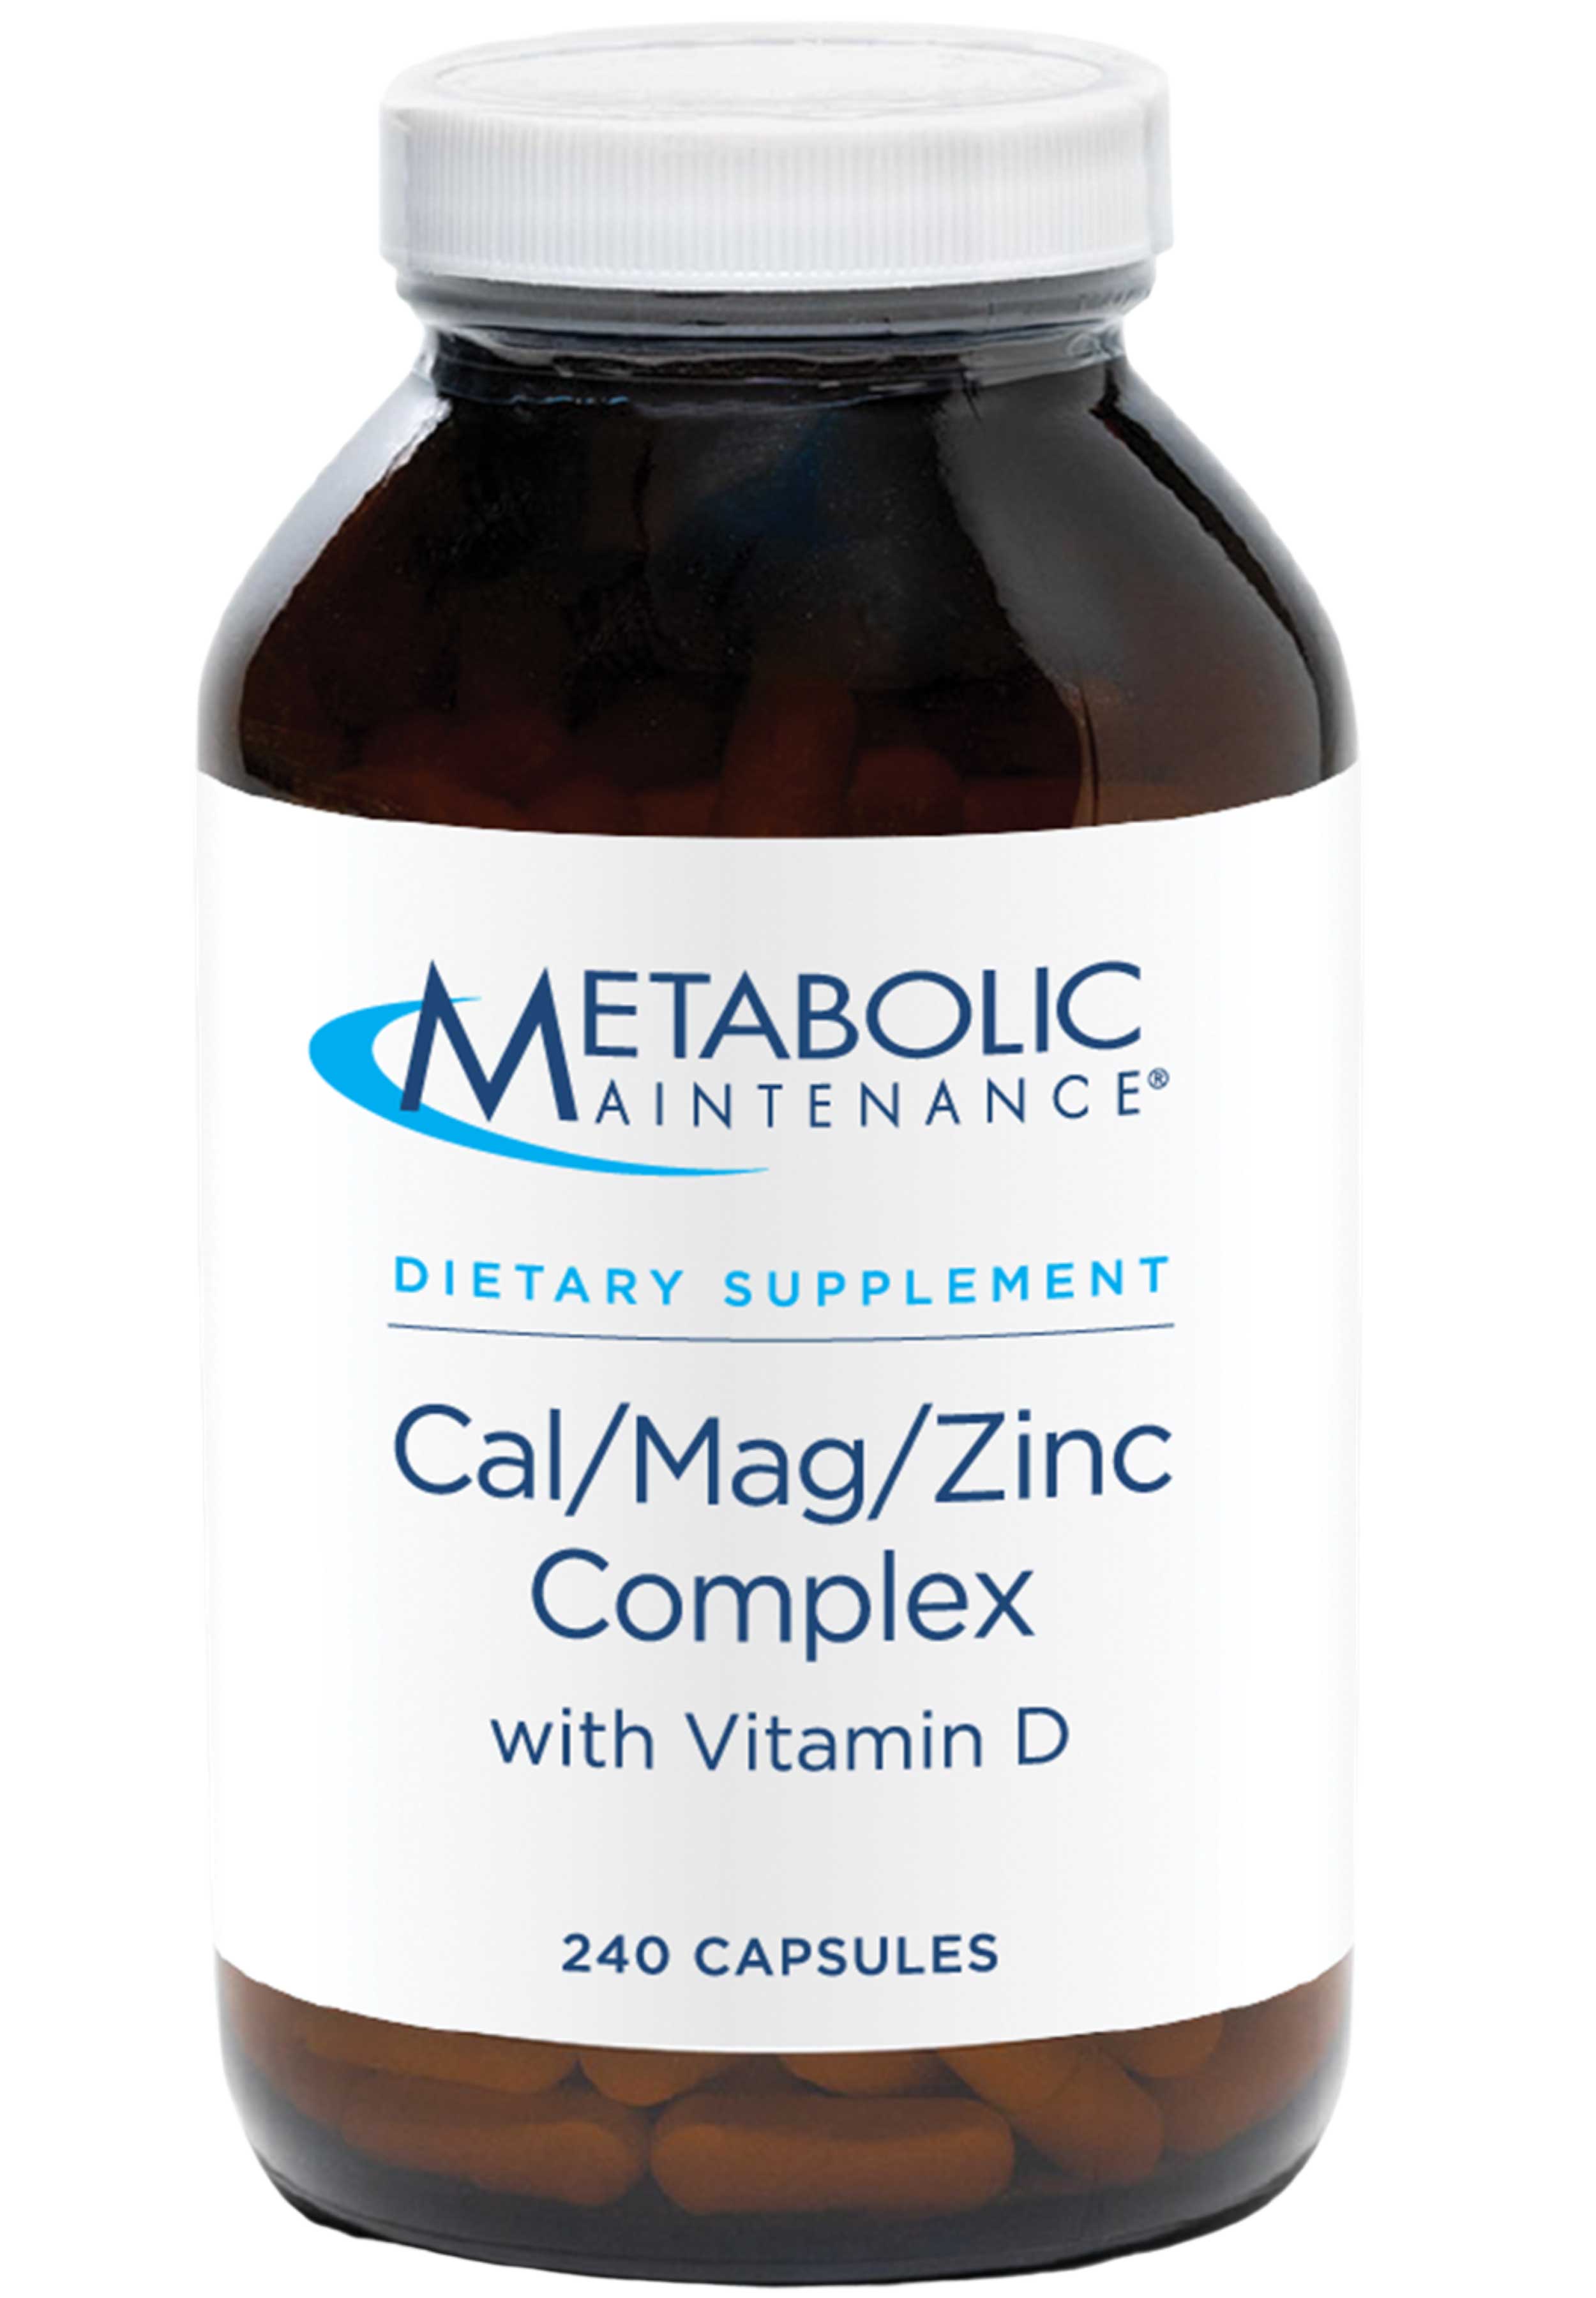 Metabolic Maintenance Cal/Mag/Zinc Complex with Vitamin D